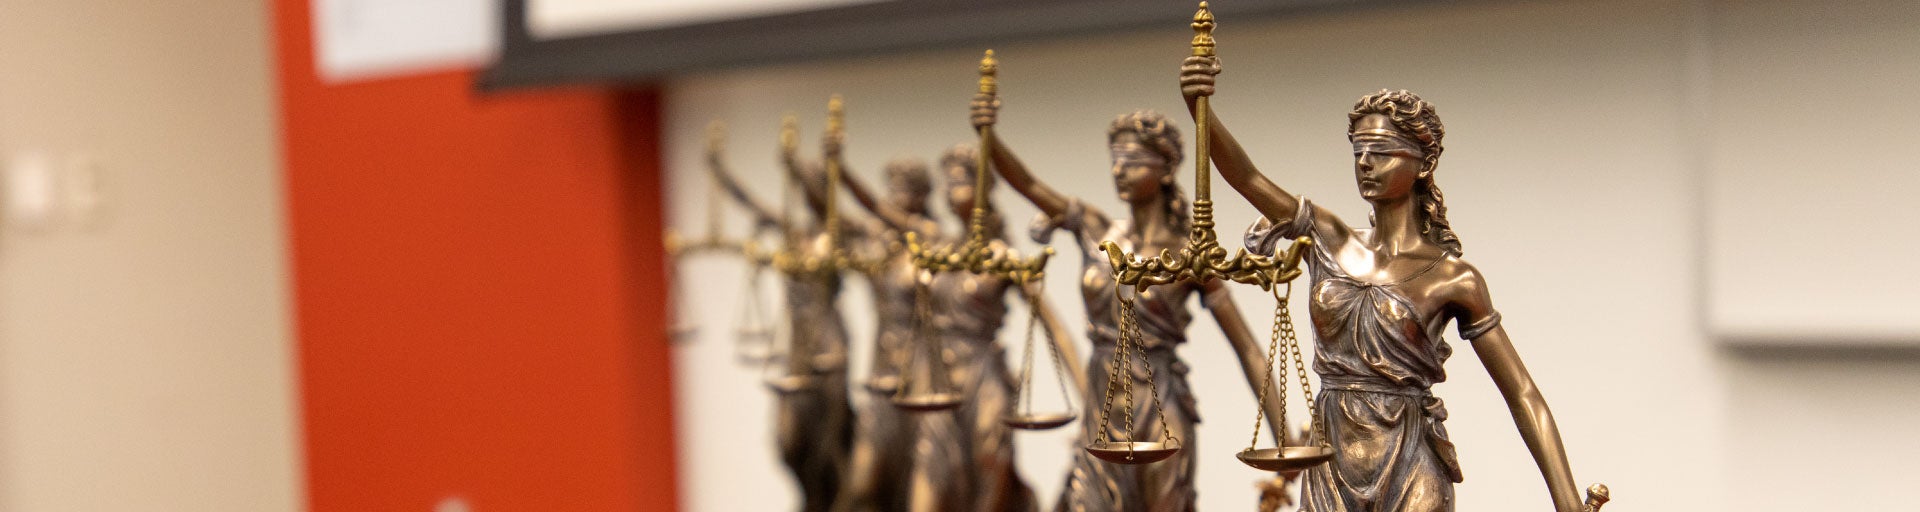 Five Lady Justice bronze statues displayed on a table in a row.